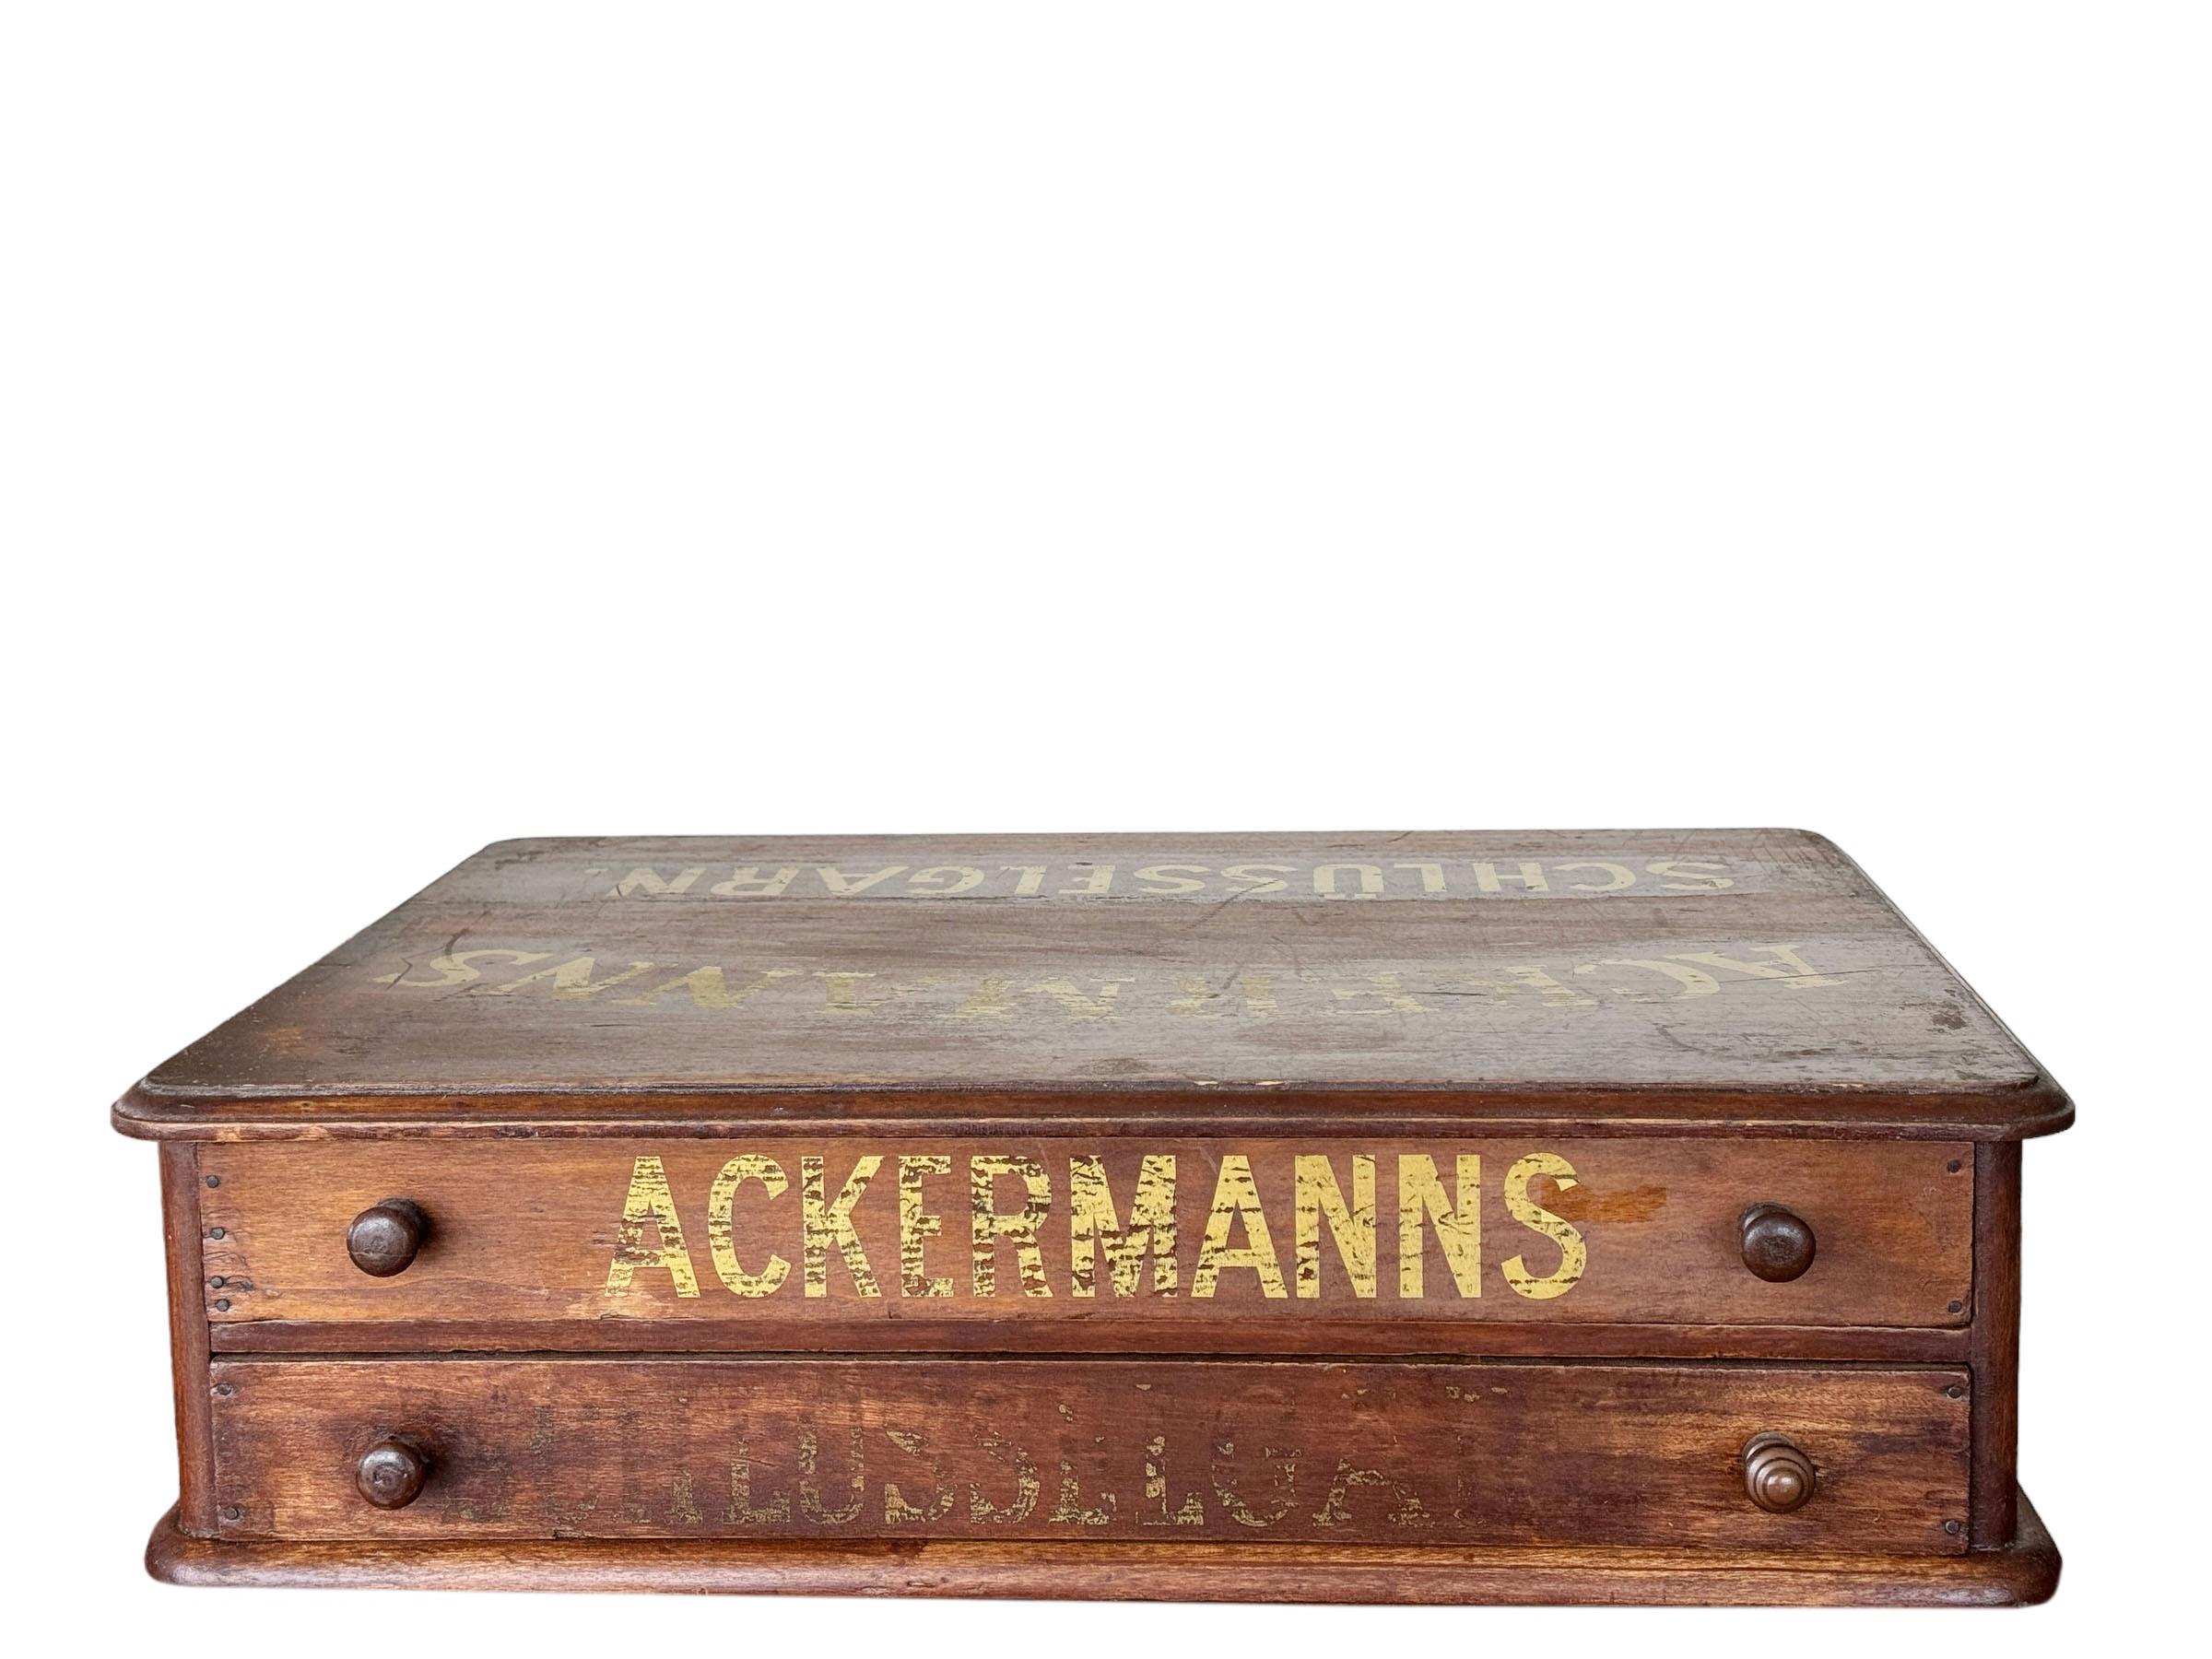 An early 19th century German advertising cabinet. Cabinet with two drawers with gold writing on the top and drawers that reads Ackermanns Schlusselgarn. It appears it would have been on the counter so the top would face the customer for them to read